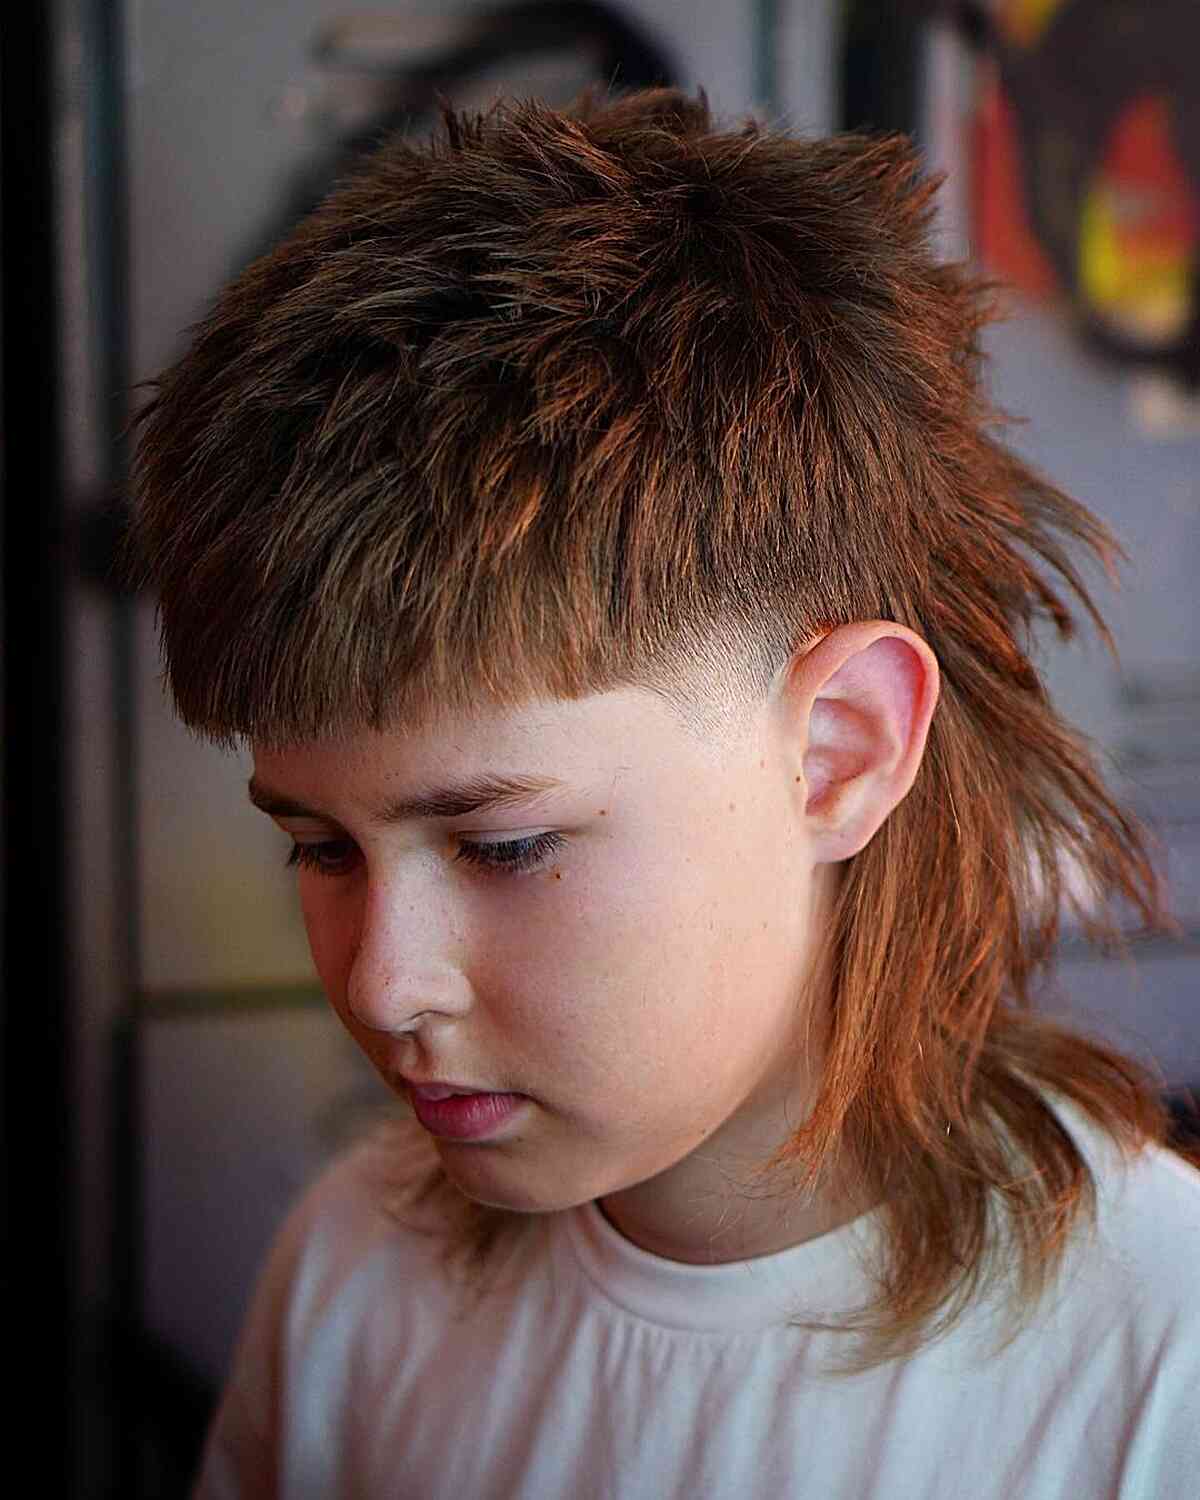 Hairstyle Boy Behind Extended Strand Hair Stock Photo 1592177356 |  Shutterstock